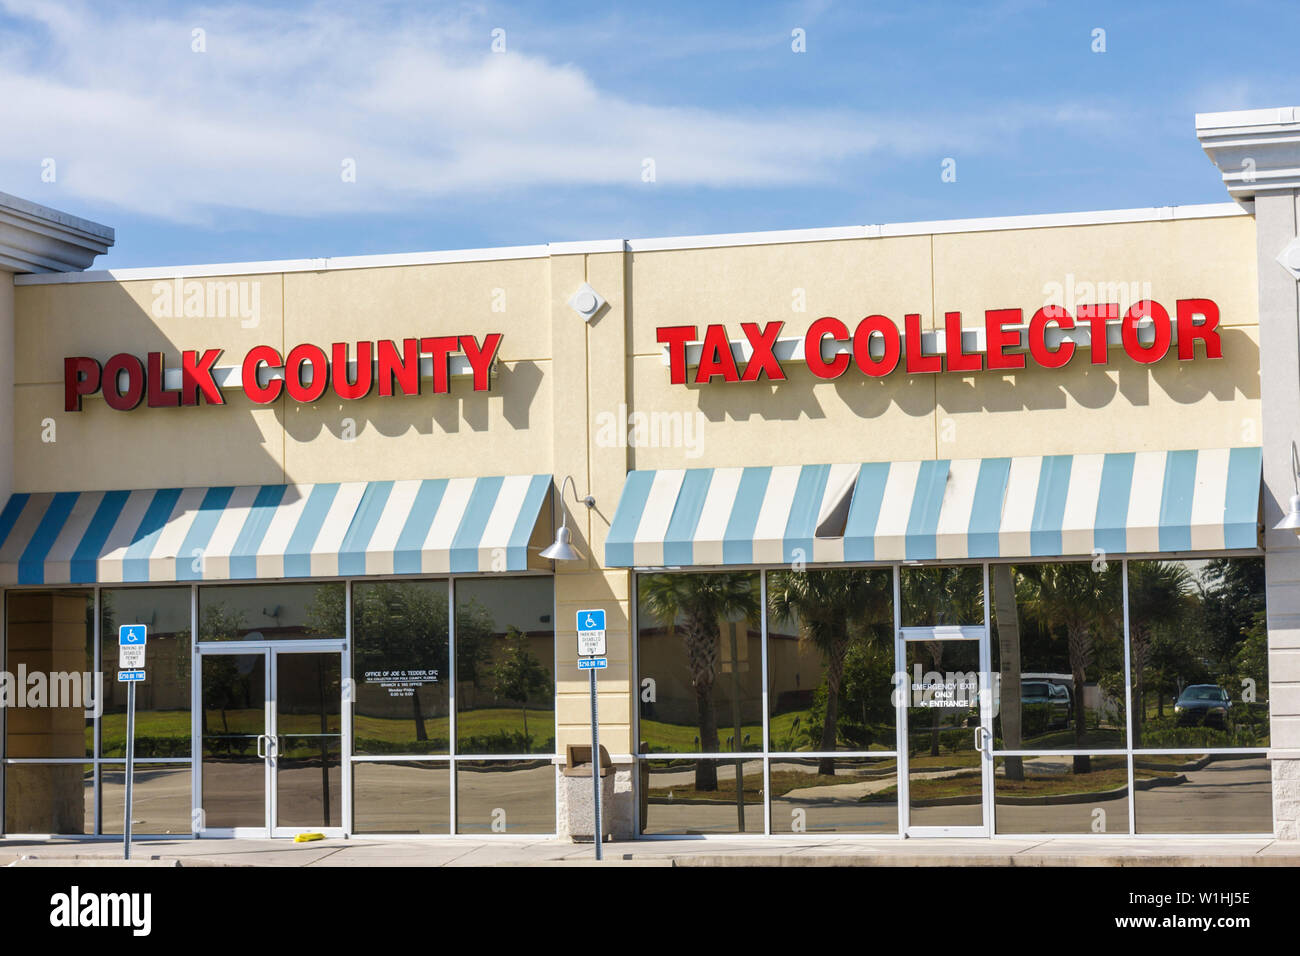 Tax Collector High Resolution Stock Photography and Images Alamy